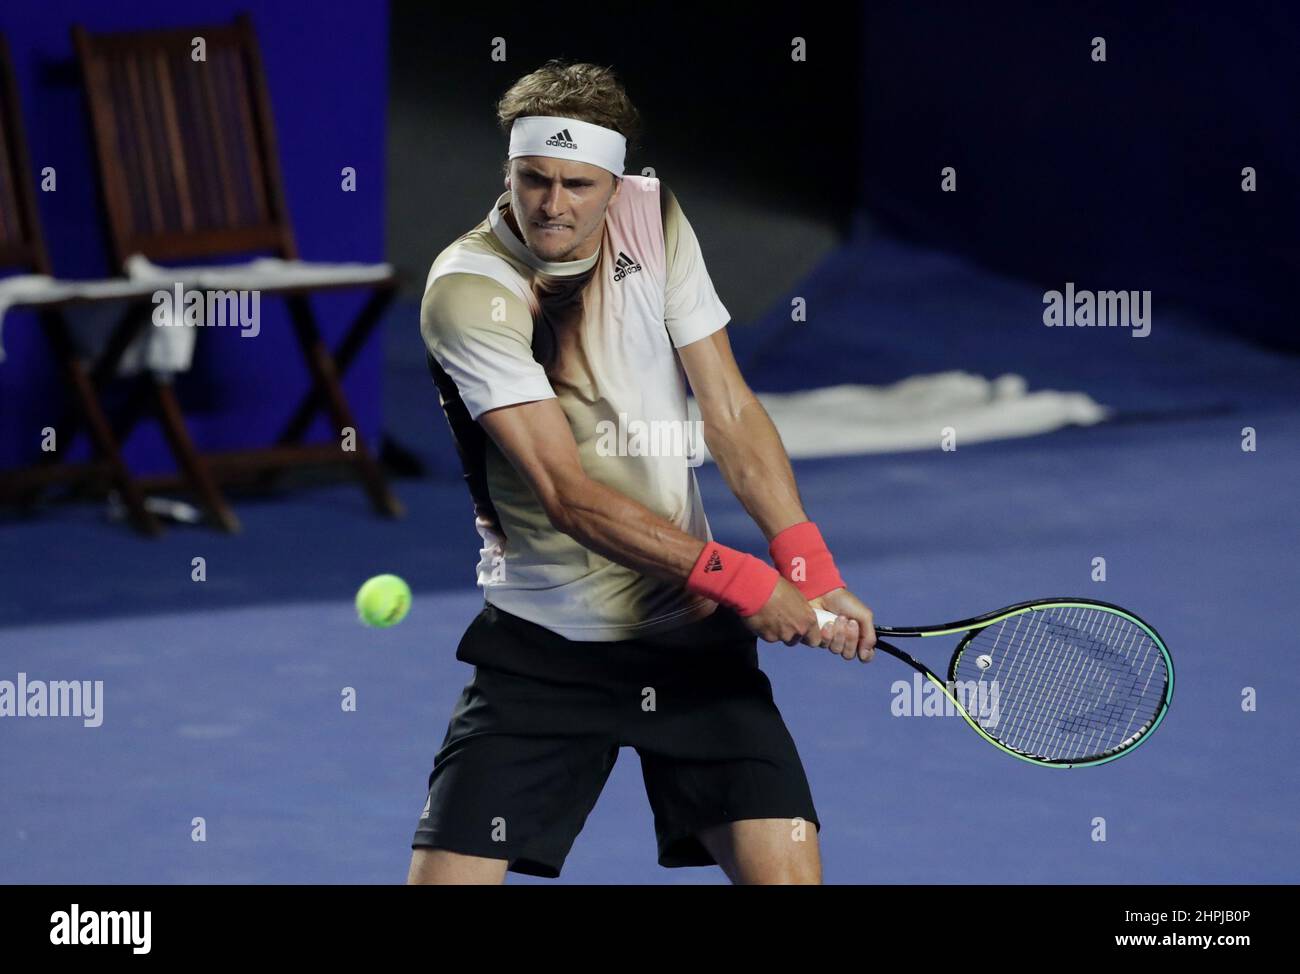 Tennis - ATP 500 - Abierto Mexicano - The Fairmont Acapulco Princess,  Acapulco, Mexico - February 22, 2022 Germany's Alexander Zverev in action  during his match against Jenson Brooksby of the U.S. REUTERS/Henry Romero  Stock Photo - Alamy